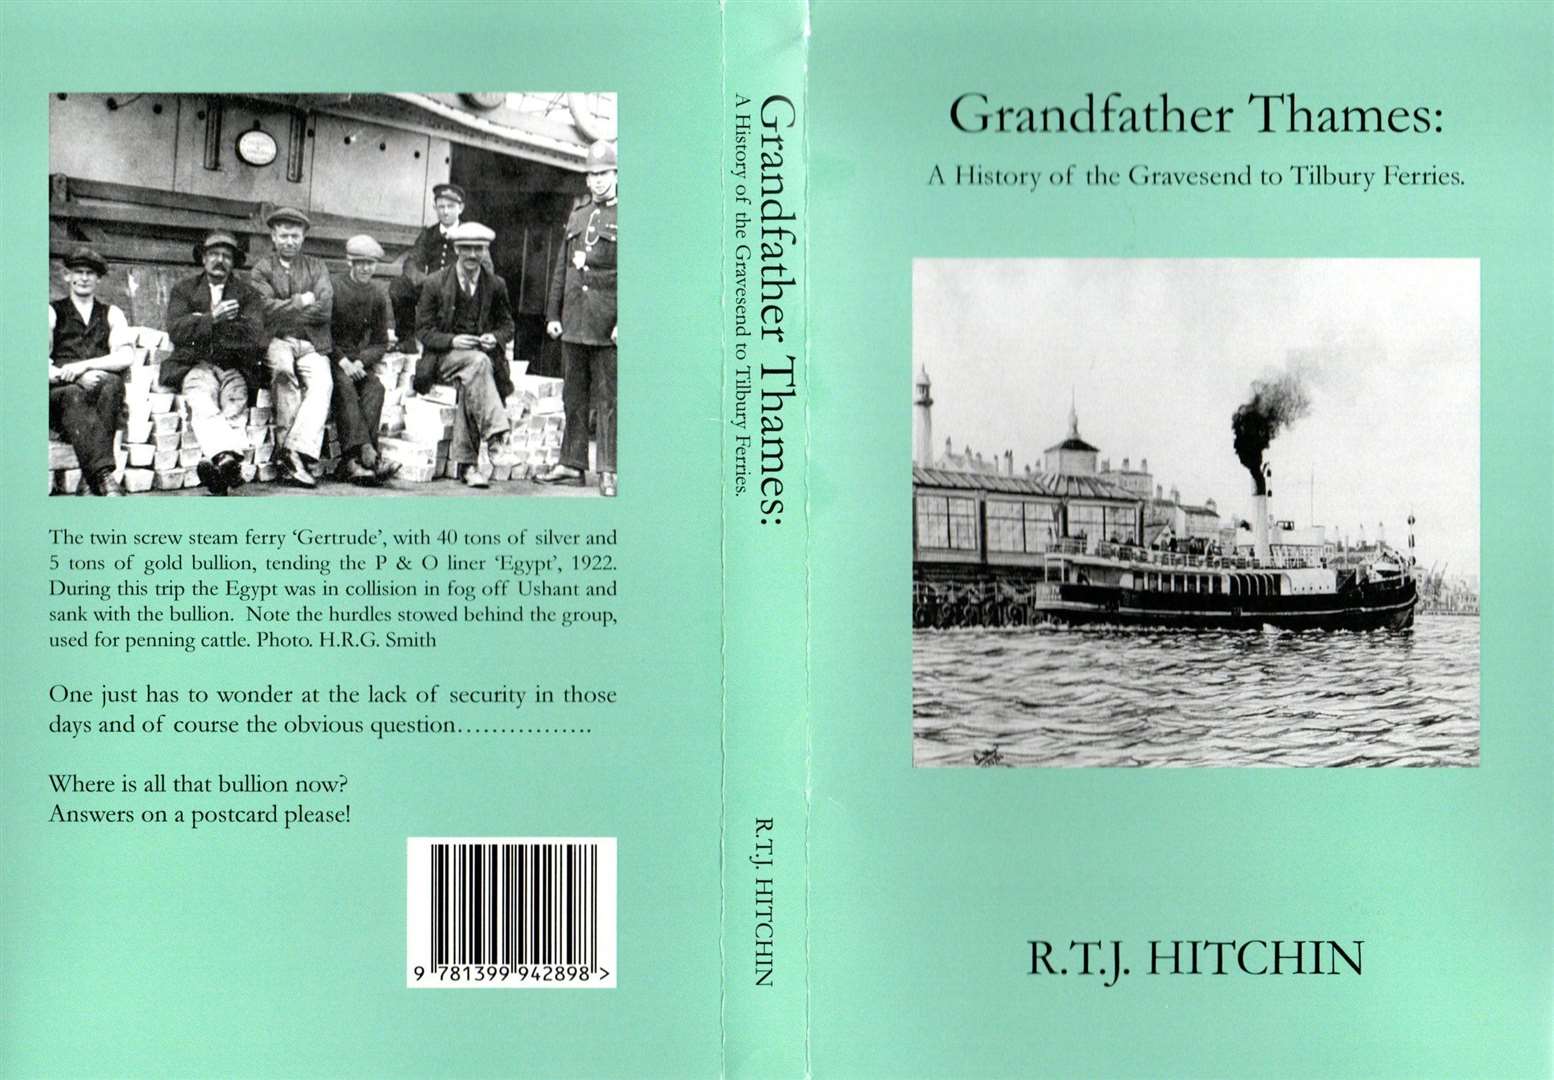 Grandfather Thames: A History of the Gravesend to Tilbury Ferries book